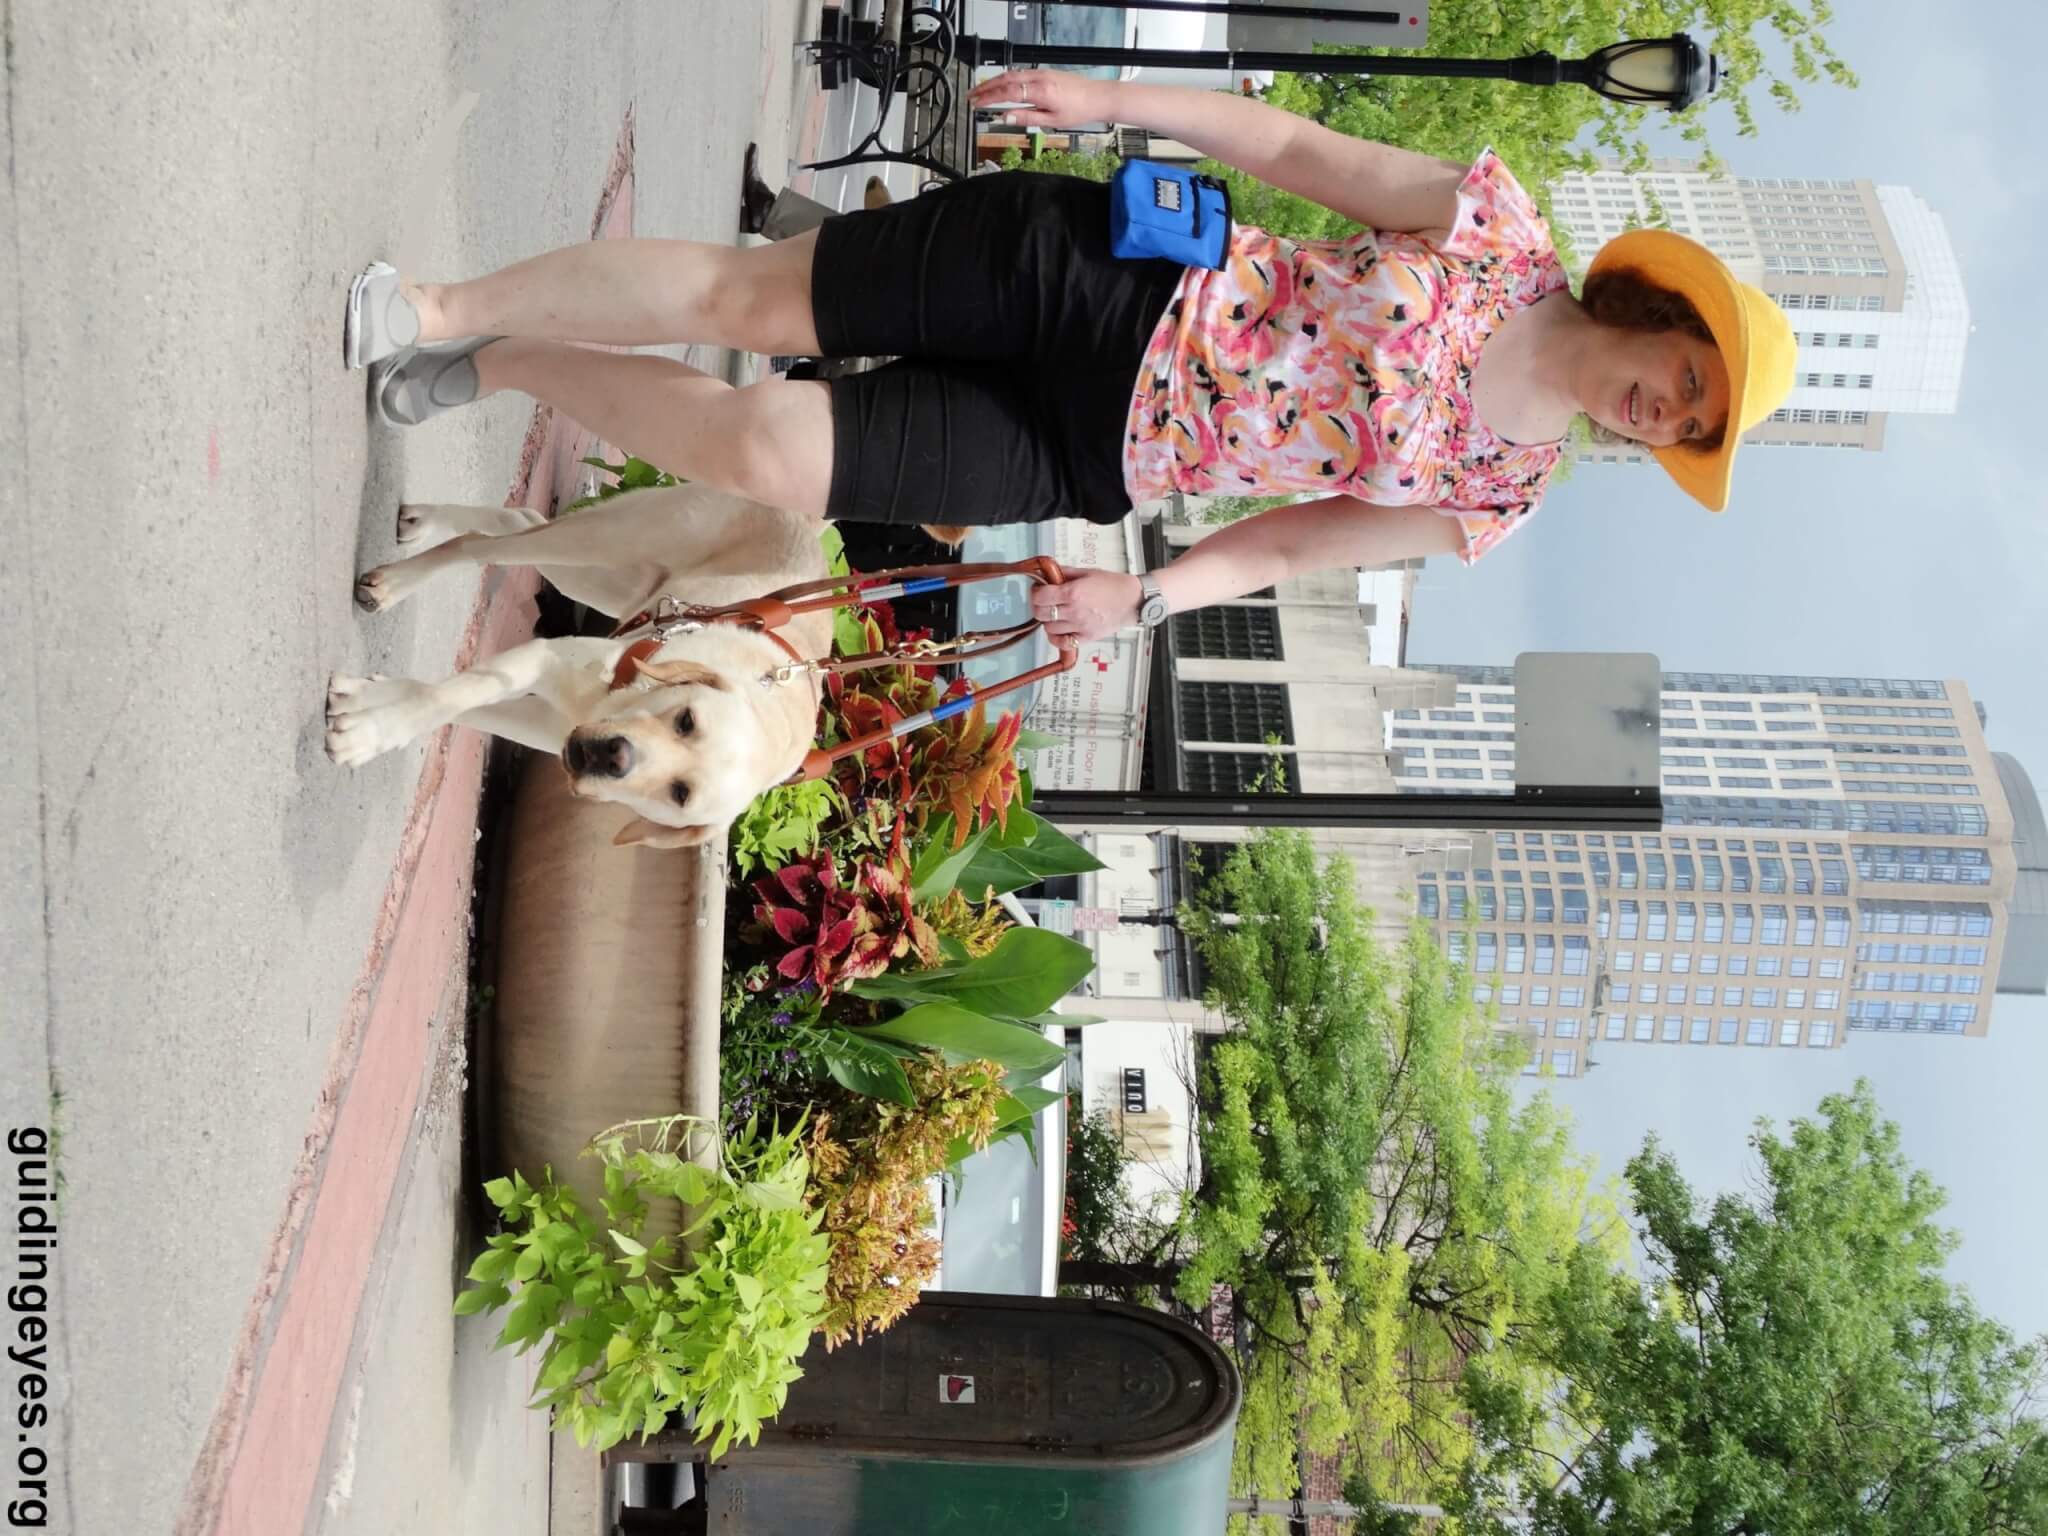 Kathy and her guide dog Nacho, independently walking down the sidewalk in White Plains, NY